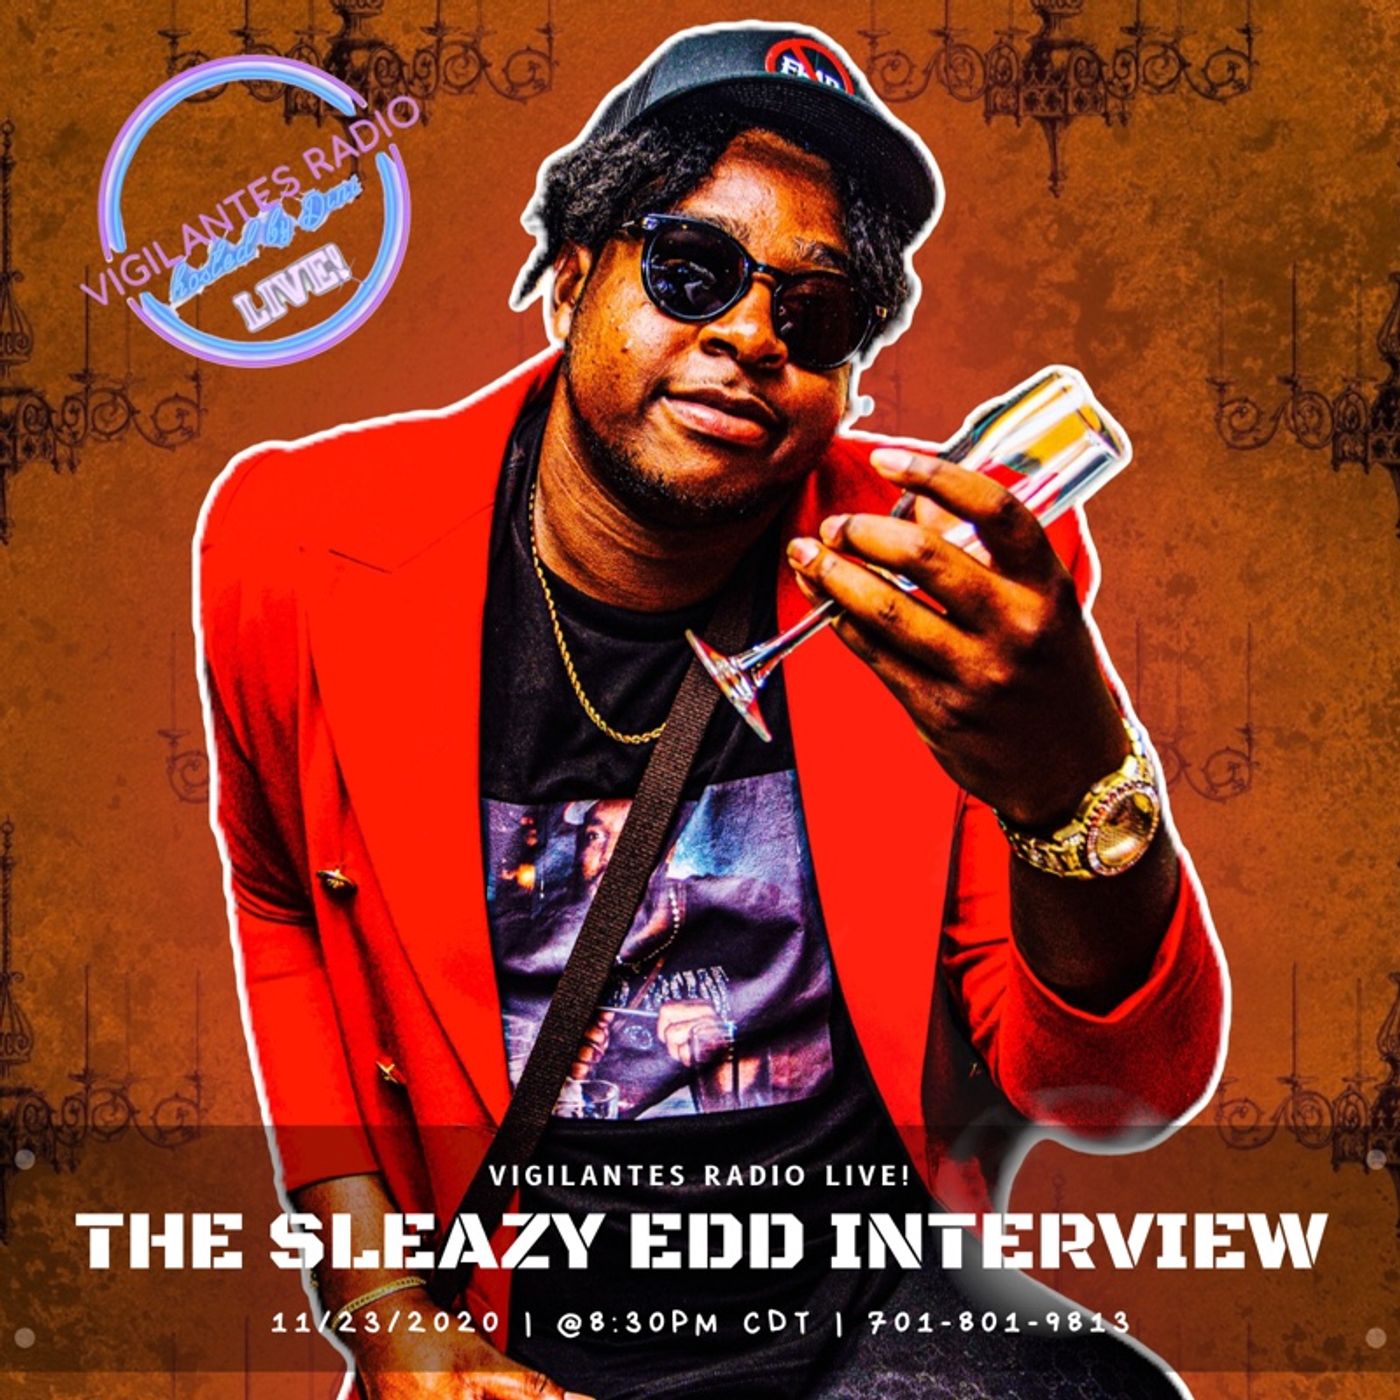 The Sleazy Edd Interview. Image